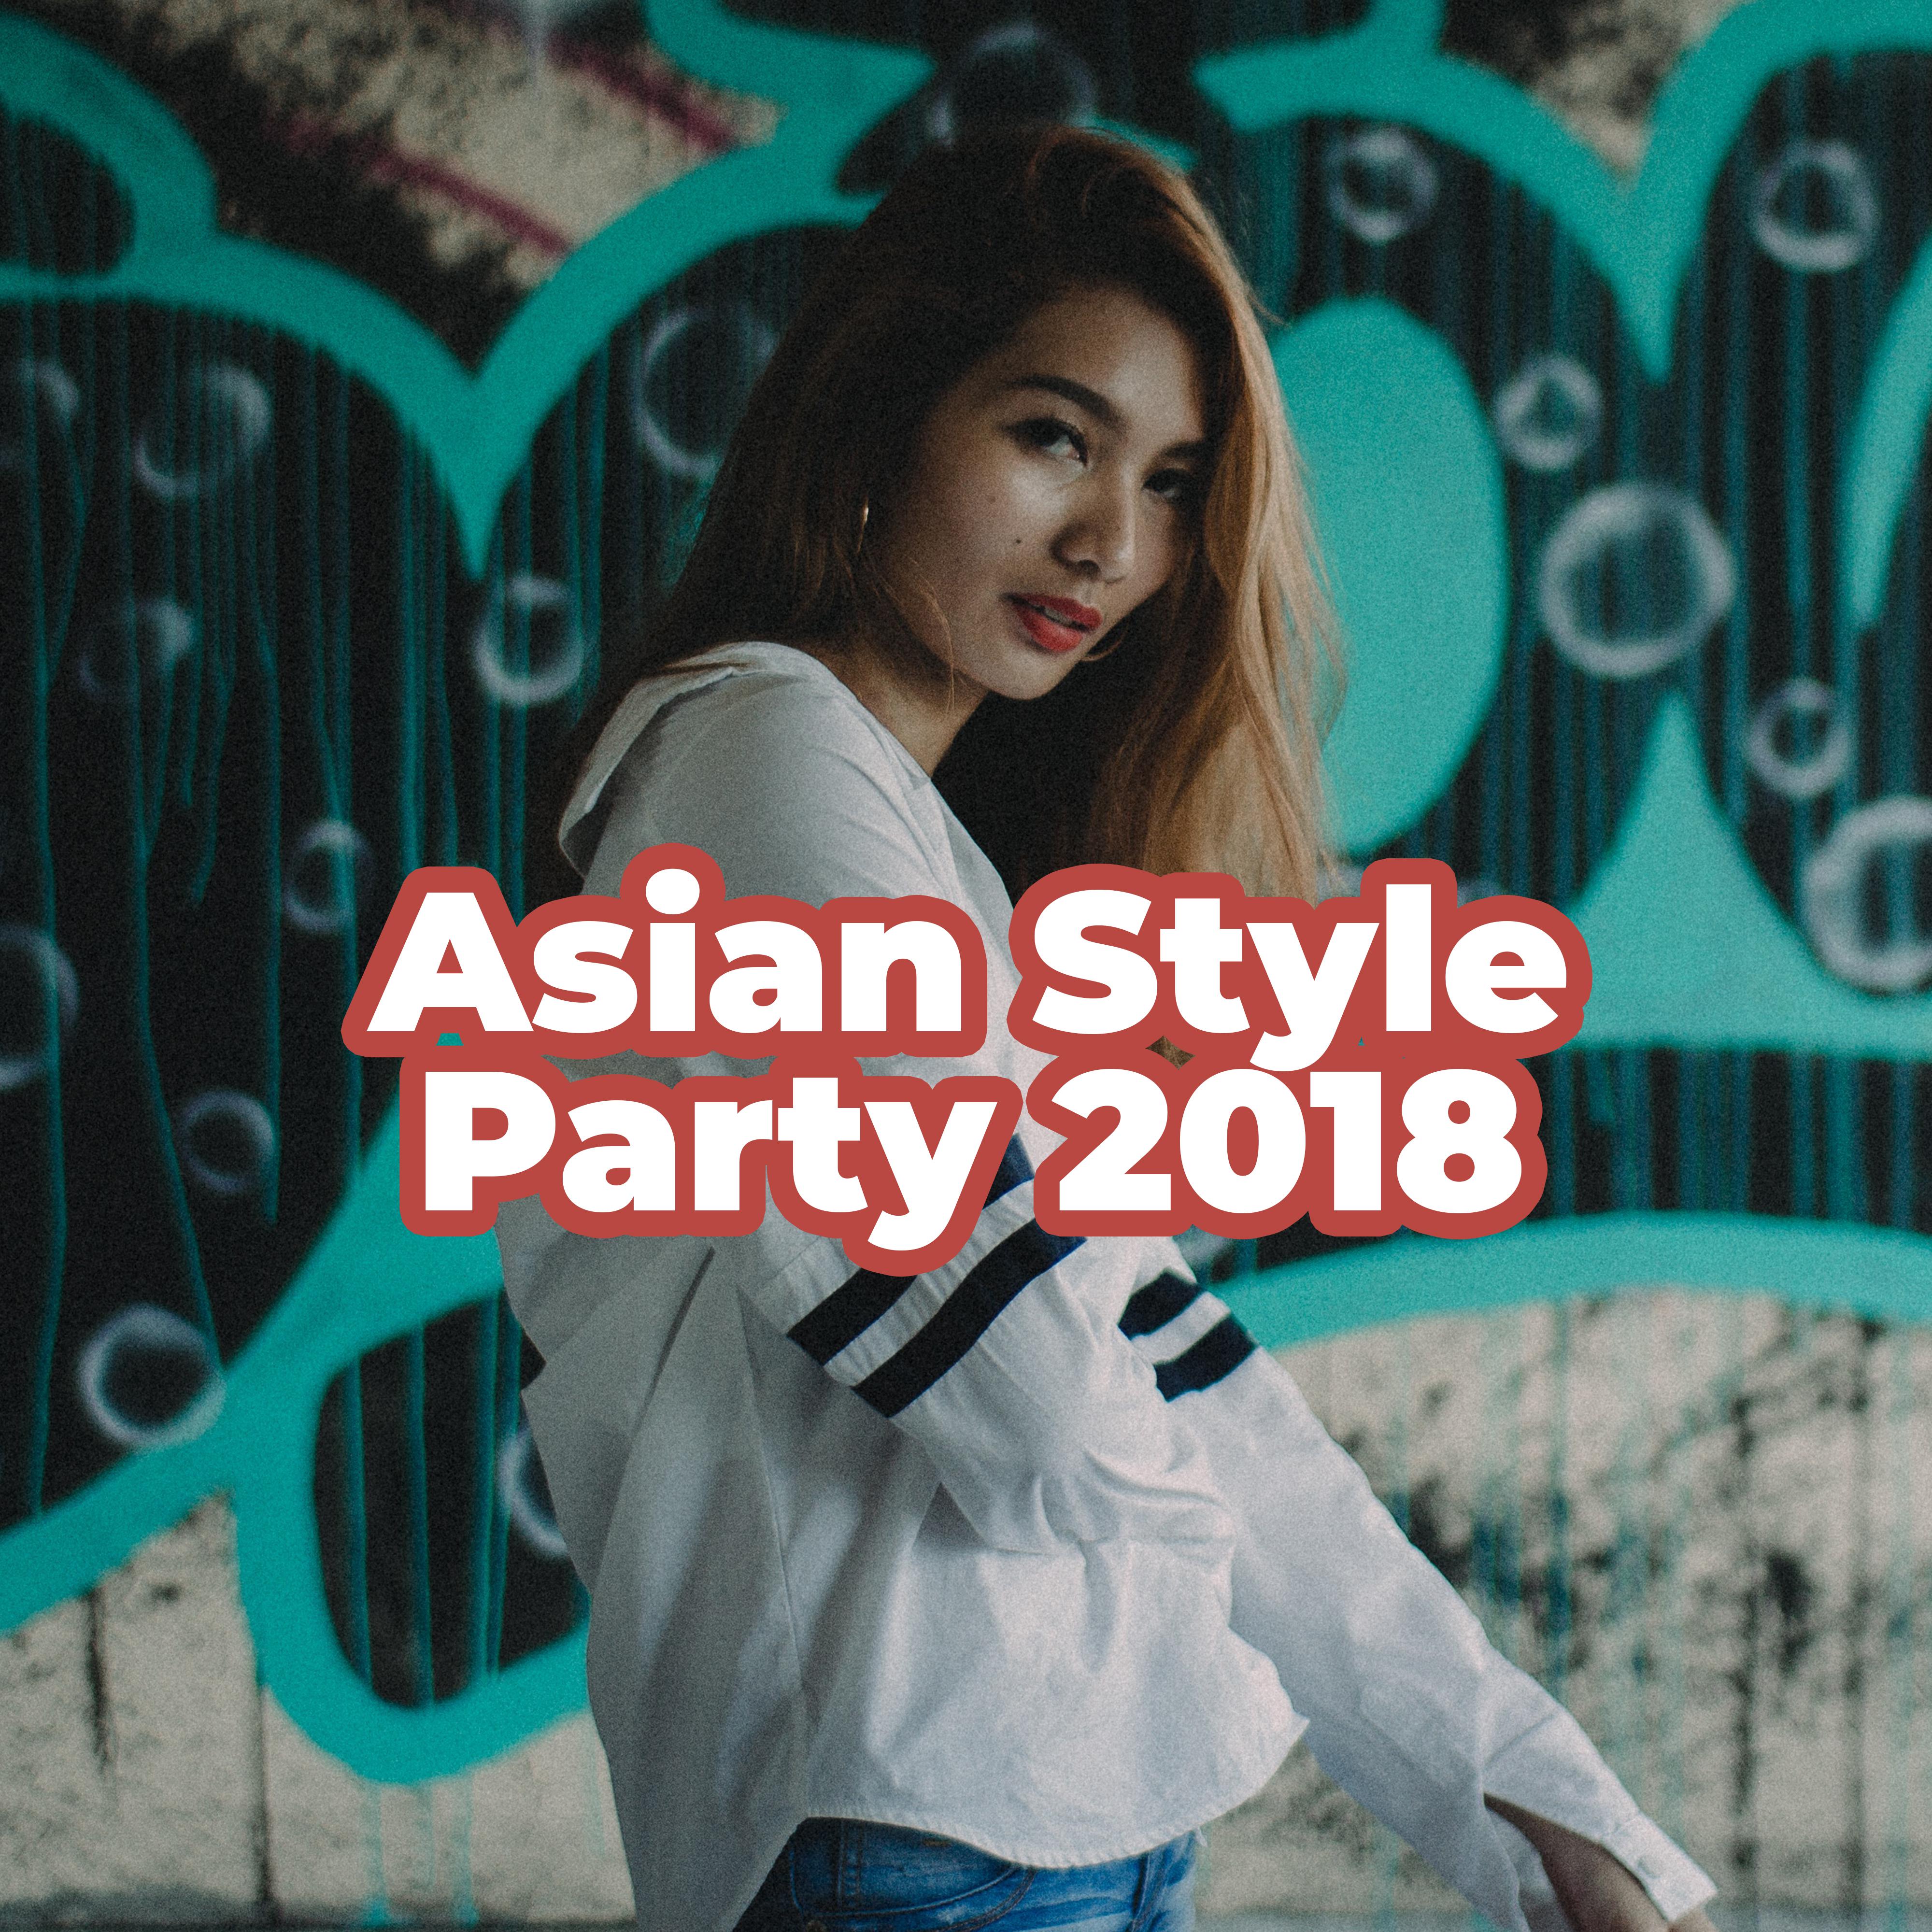 Asian Style Party 2018